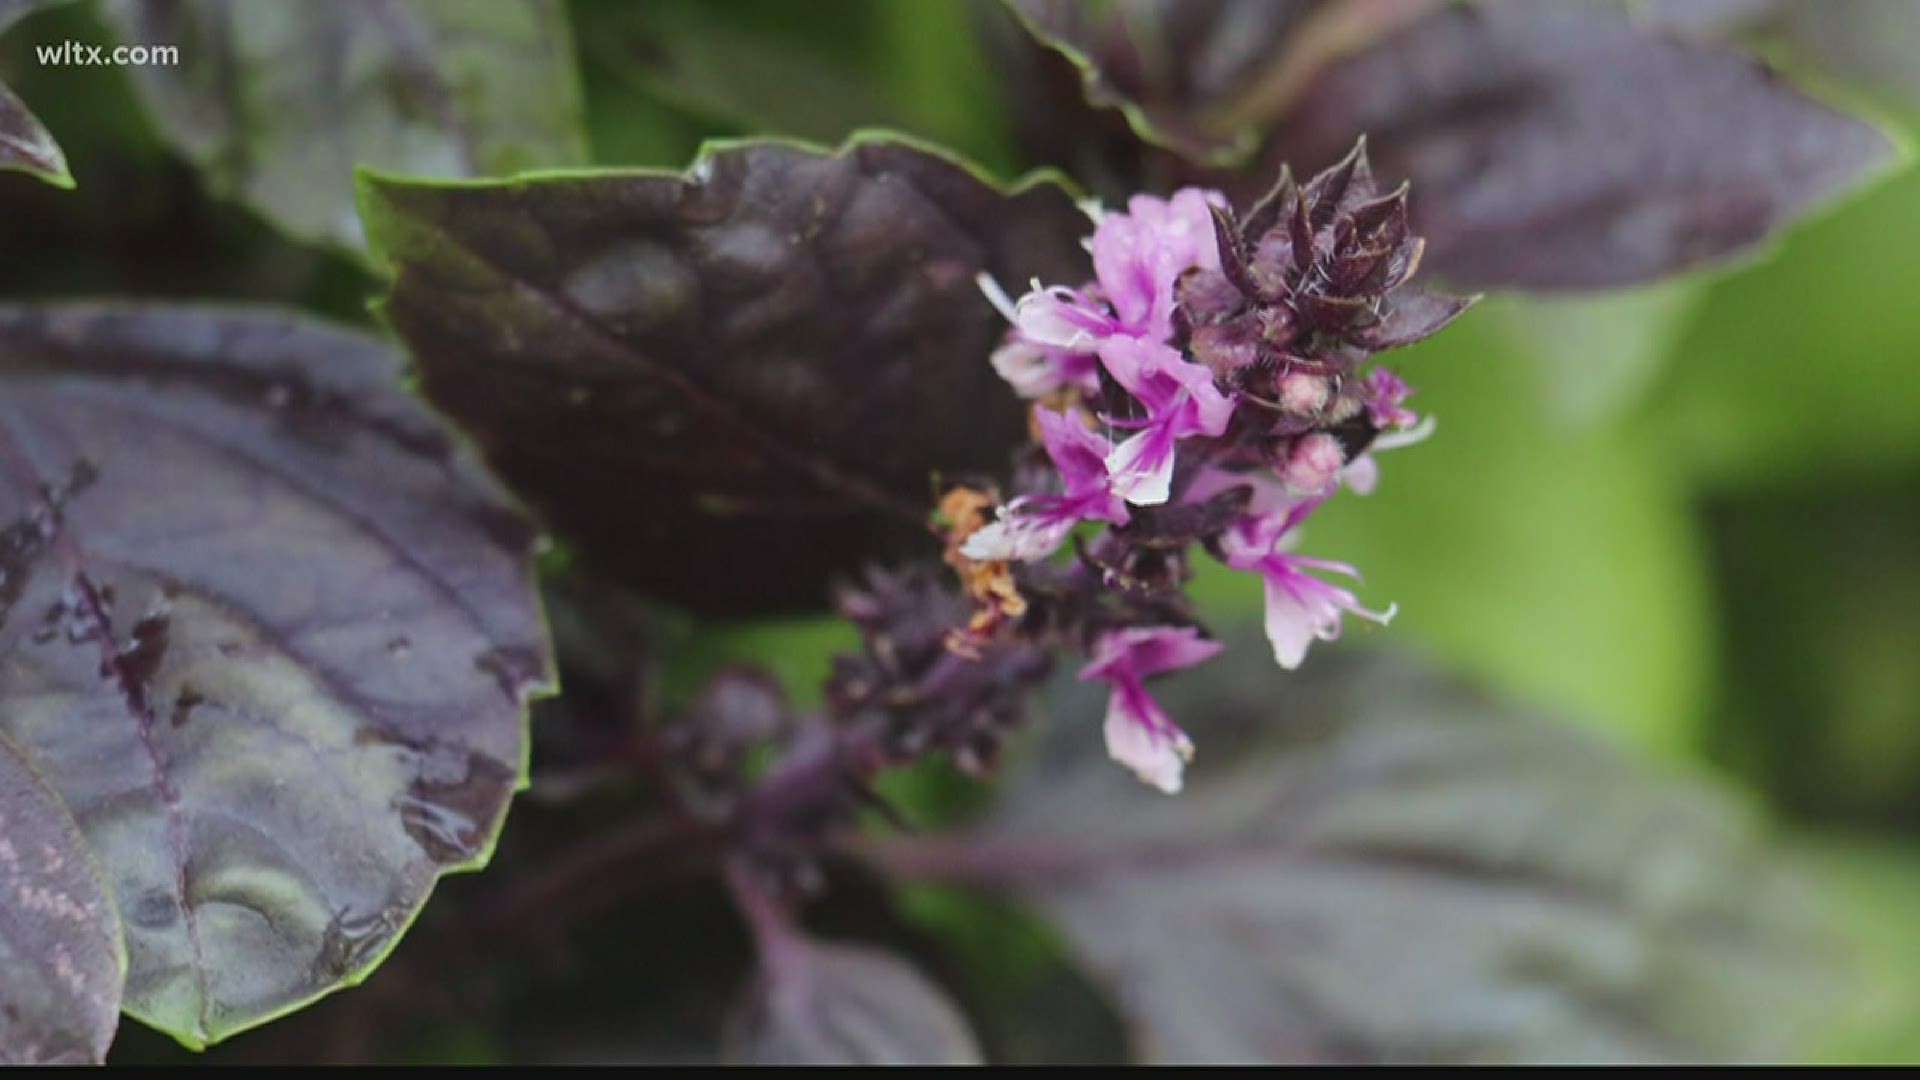 Basil will live longer if the flowers are pruned off before they develop. Meteorologist Alex Calamia explains how to prune basil to keep the plants healthy.